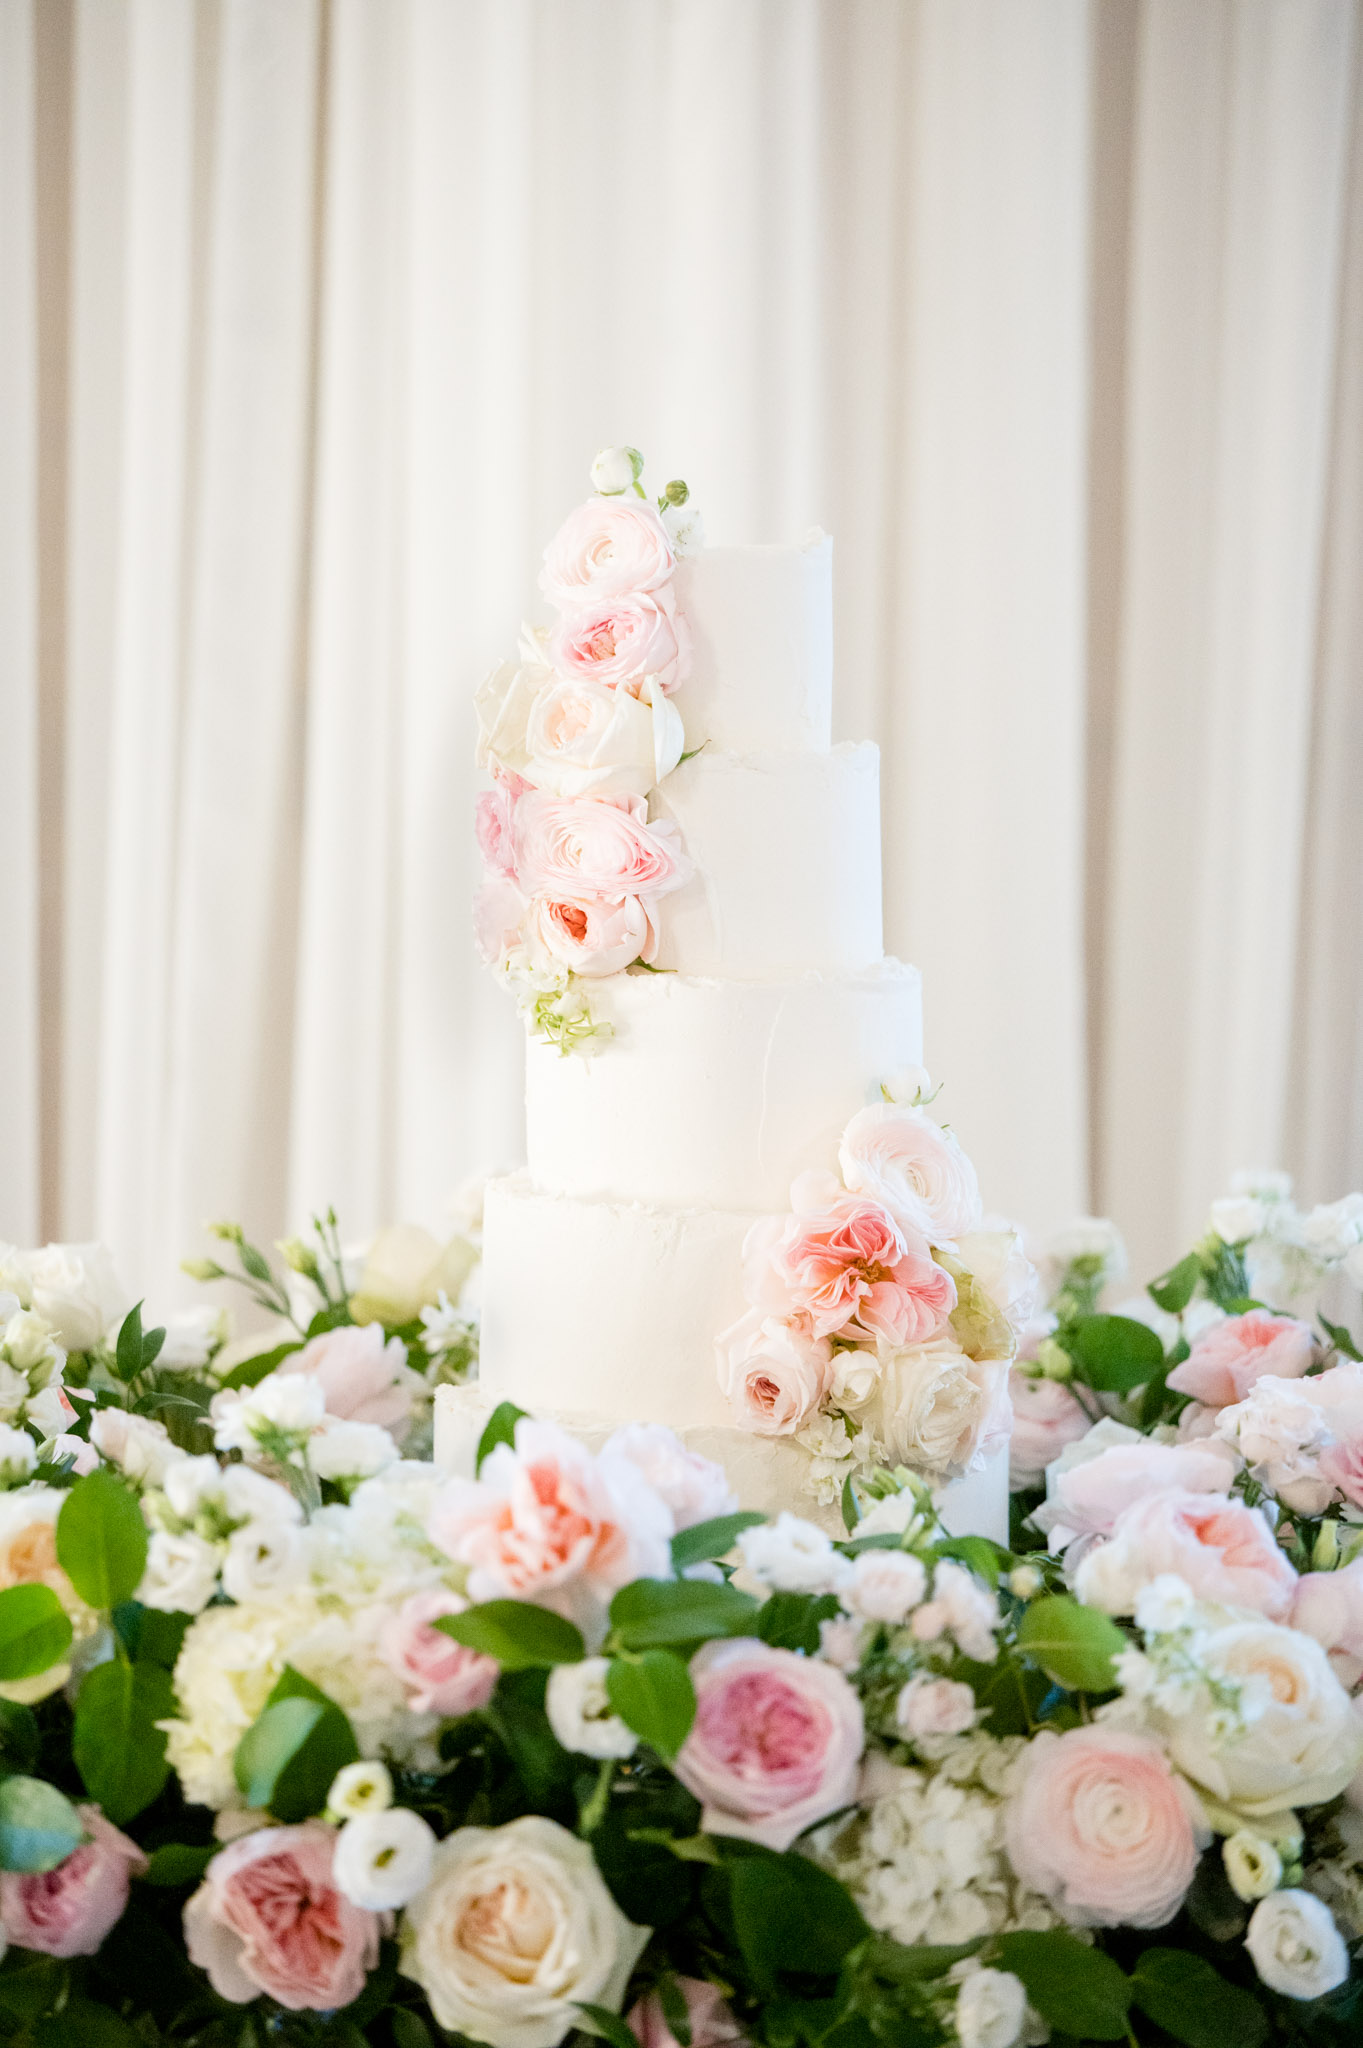 Wedding cake sits on table with flowers surrounding it.